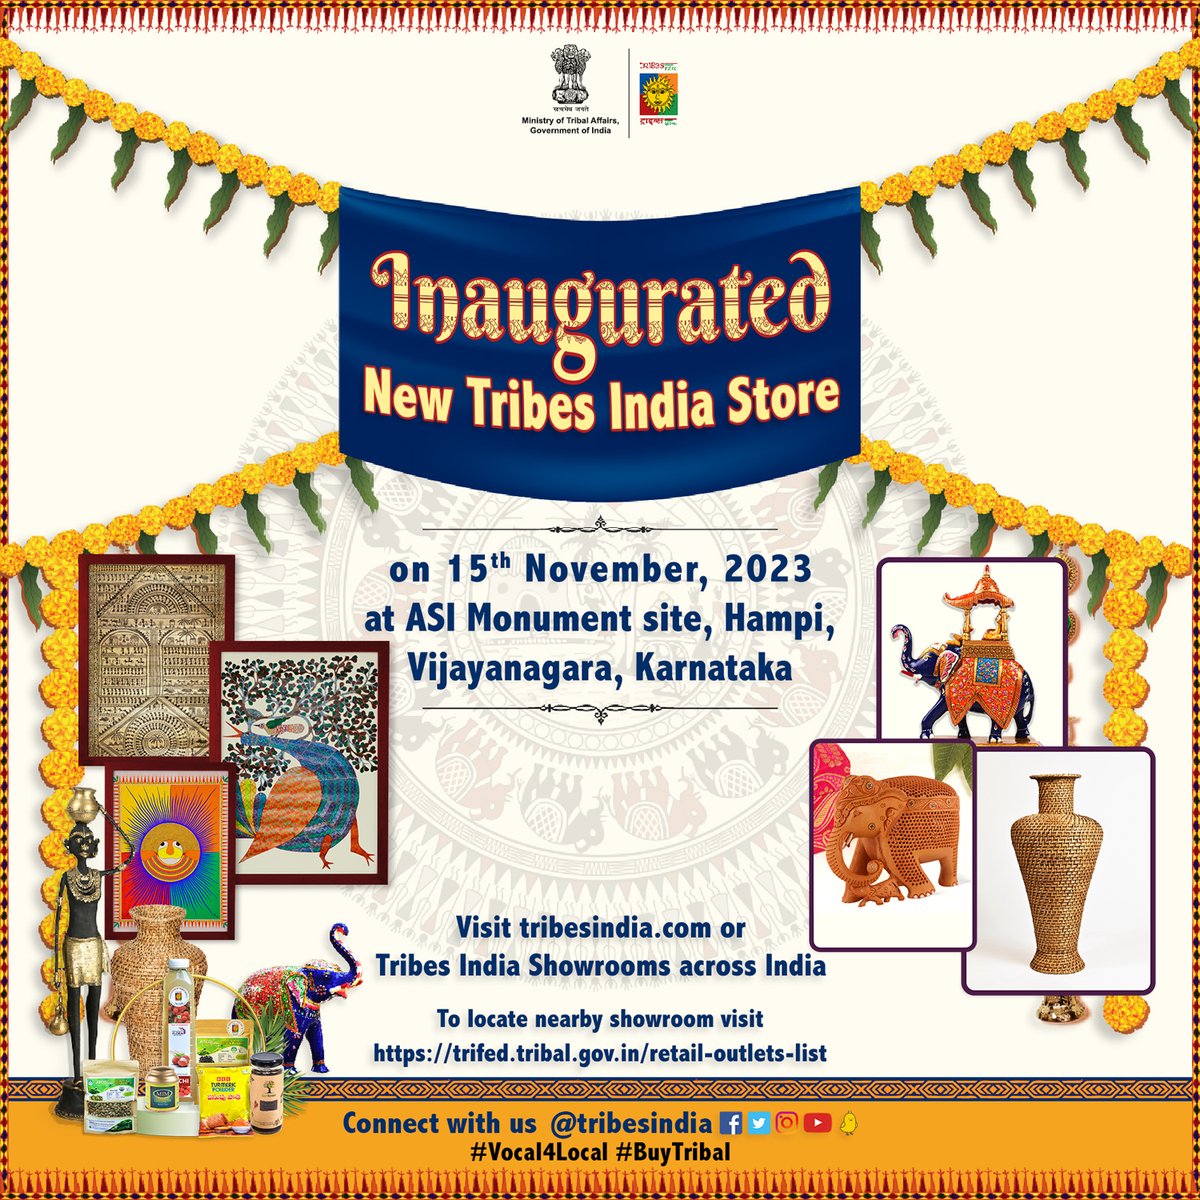 'We were elated to announce the grand opening of the new @tribesindia store at ASI Monument site, Hampi, Vijayanagara, Karnataka on 15th November 2023. Visitors had the opportunity to shop for a variety of tribal handlooms, handicrafts, and organic products.'